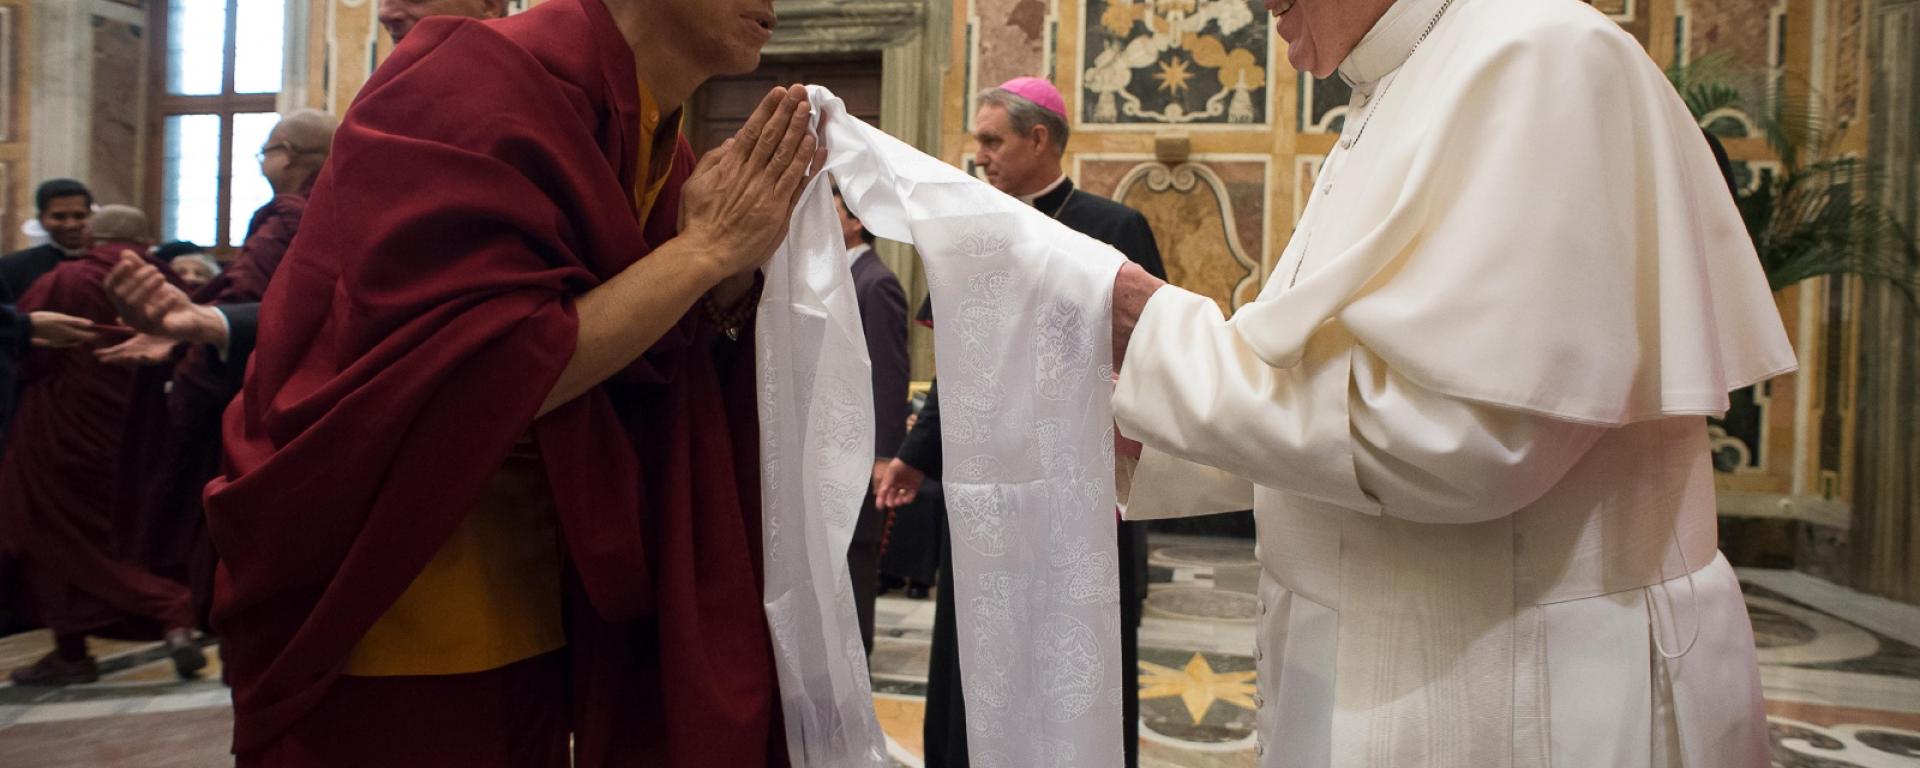 Pope Francis greets a Buddhist monk during a November audience with religious leaders at the Vatican / CNS photo